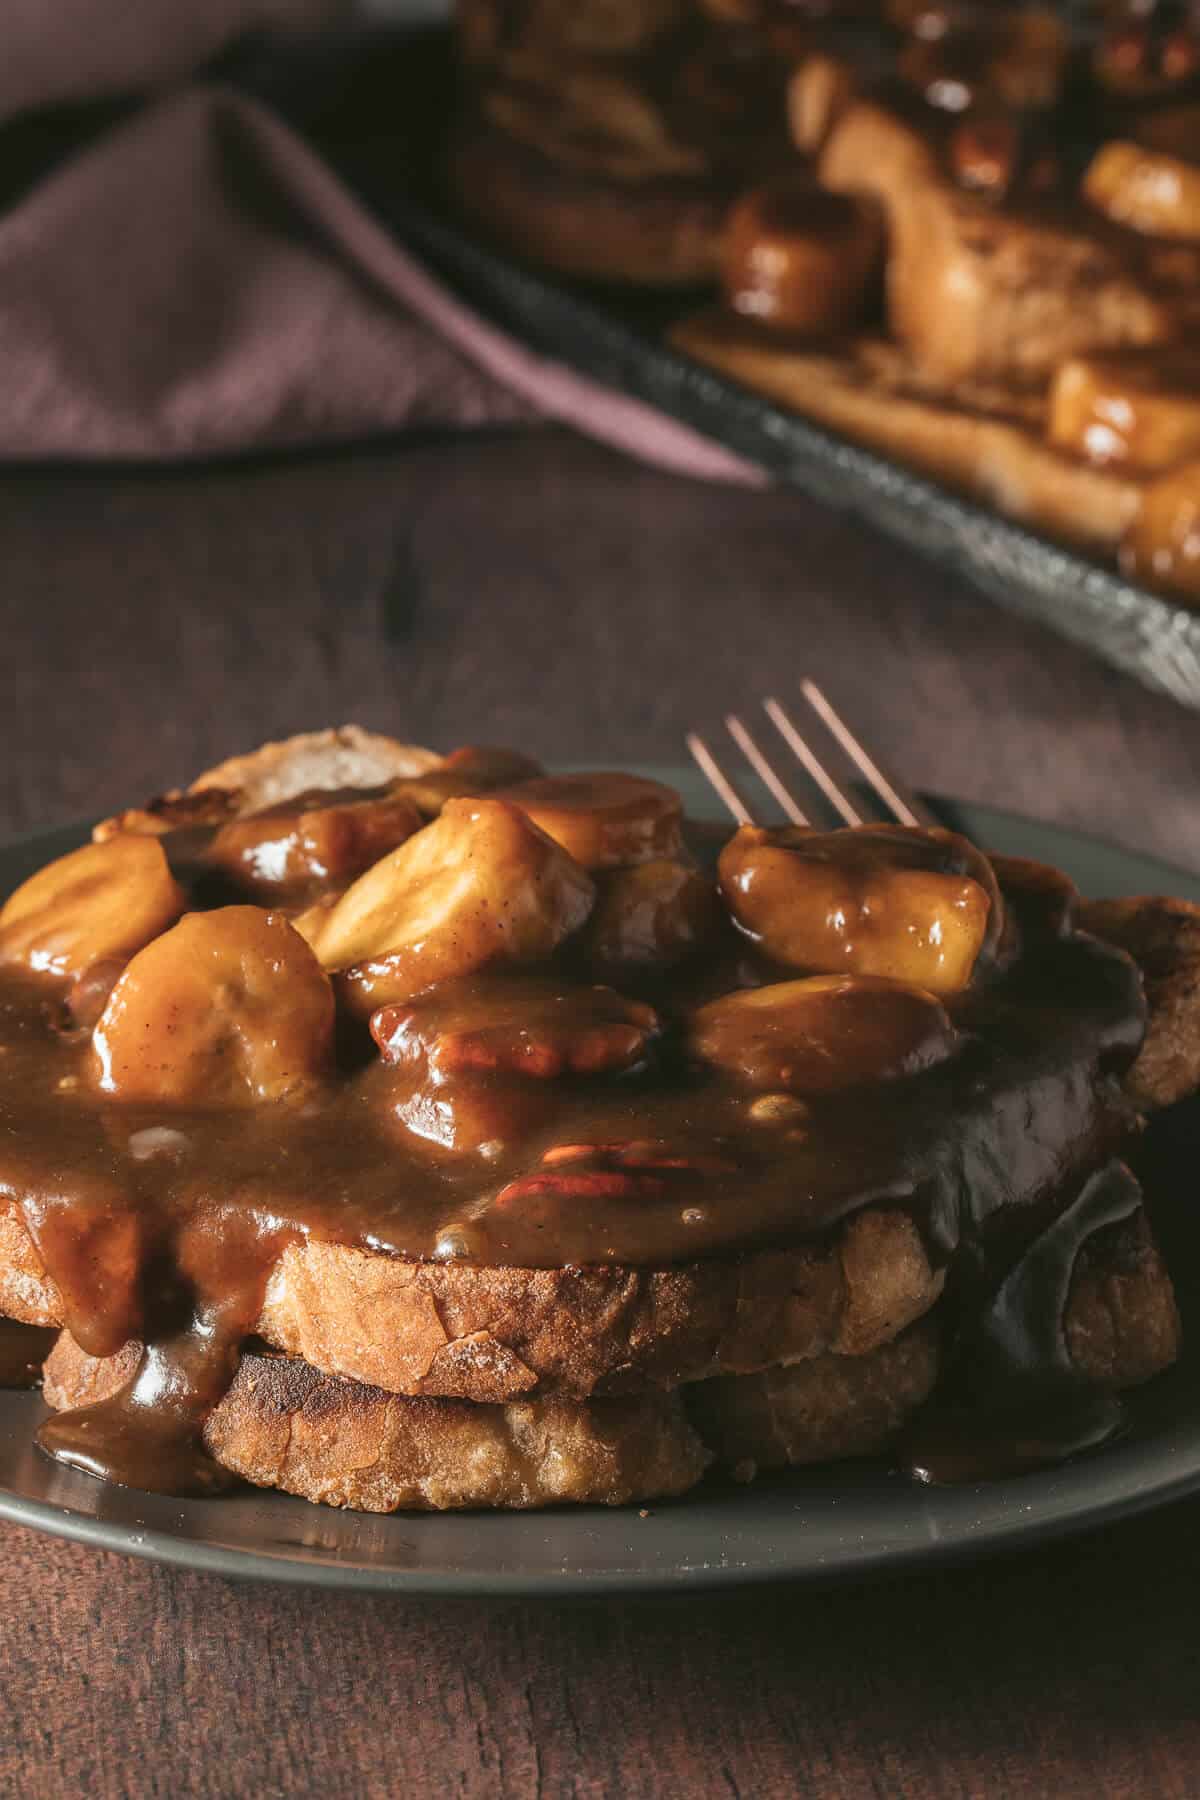 A serving of bananas foster french toast on a plate.